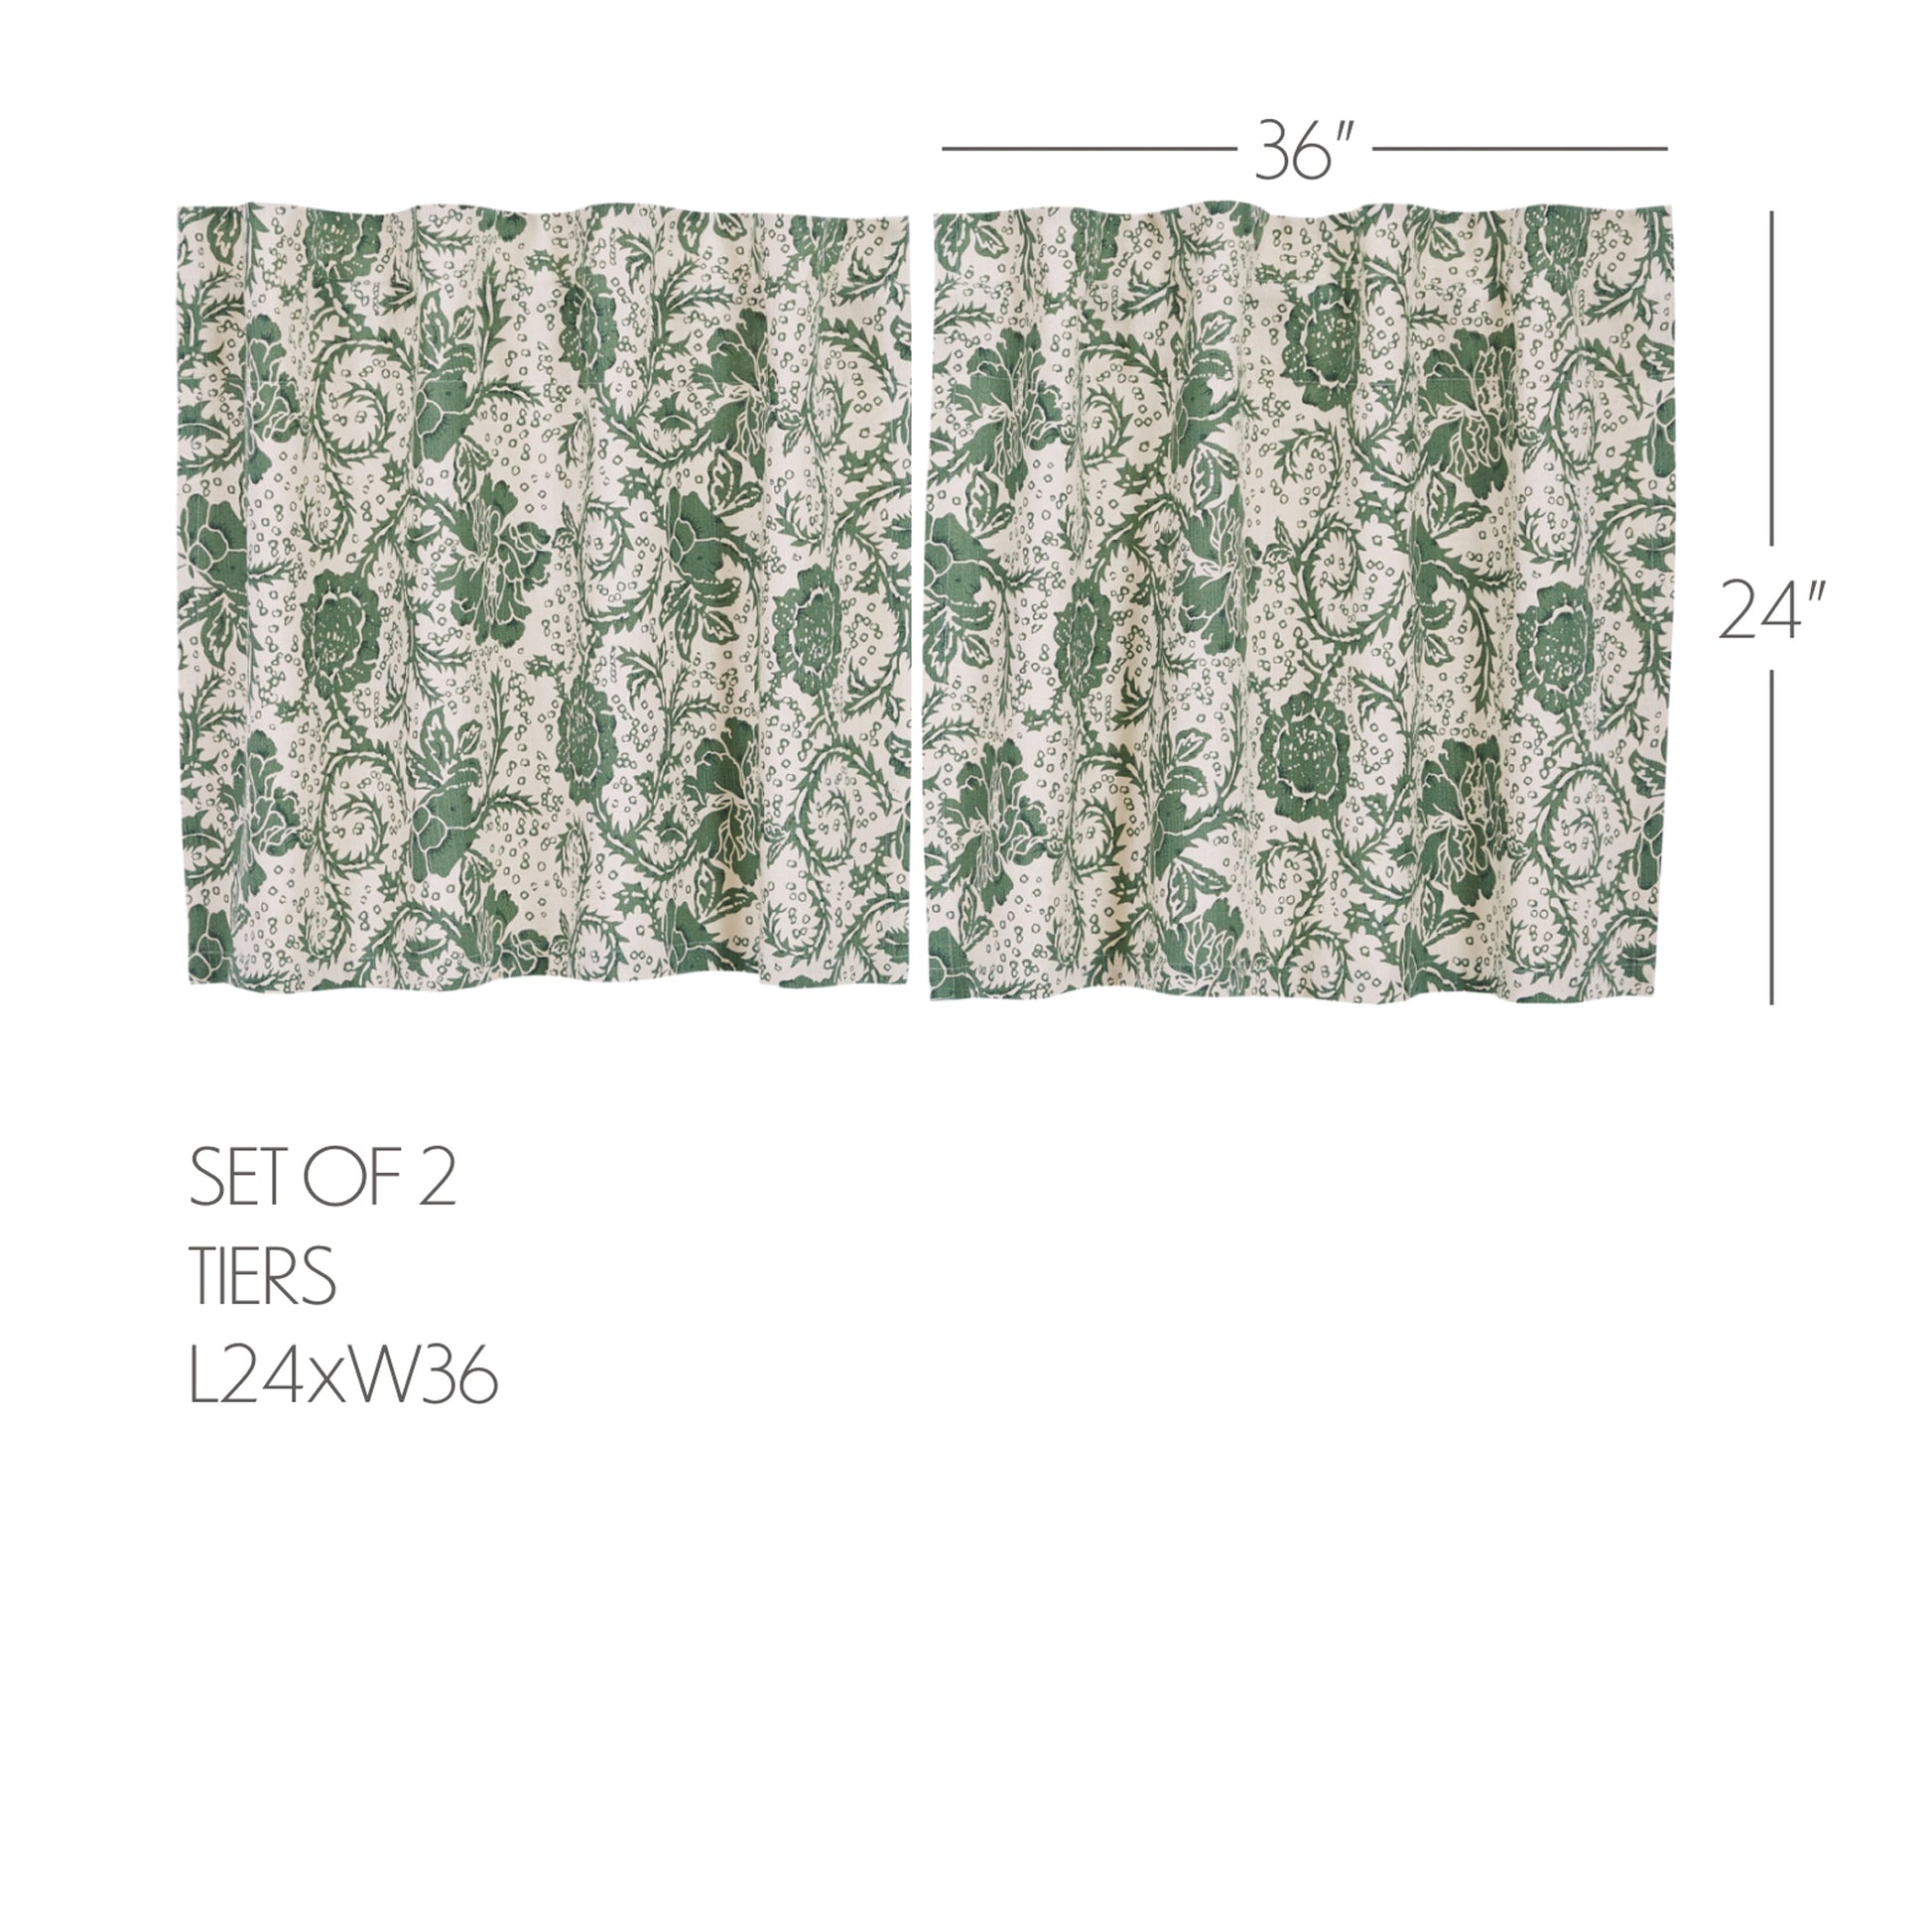 81231-Dorset-Green-Floral-Tier-Set-of-2-L24xW36-image-1